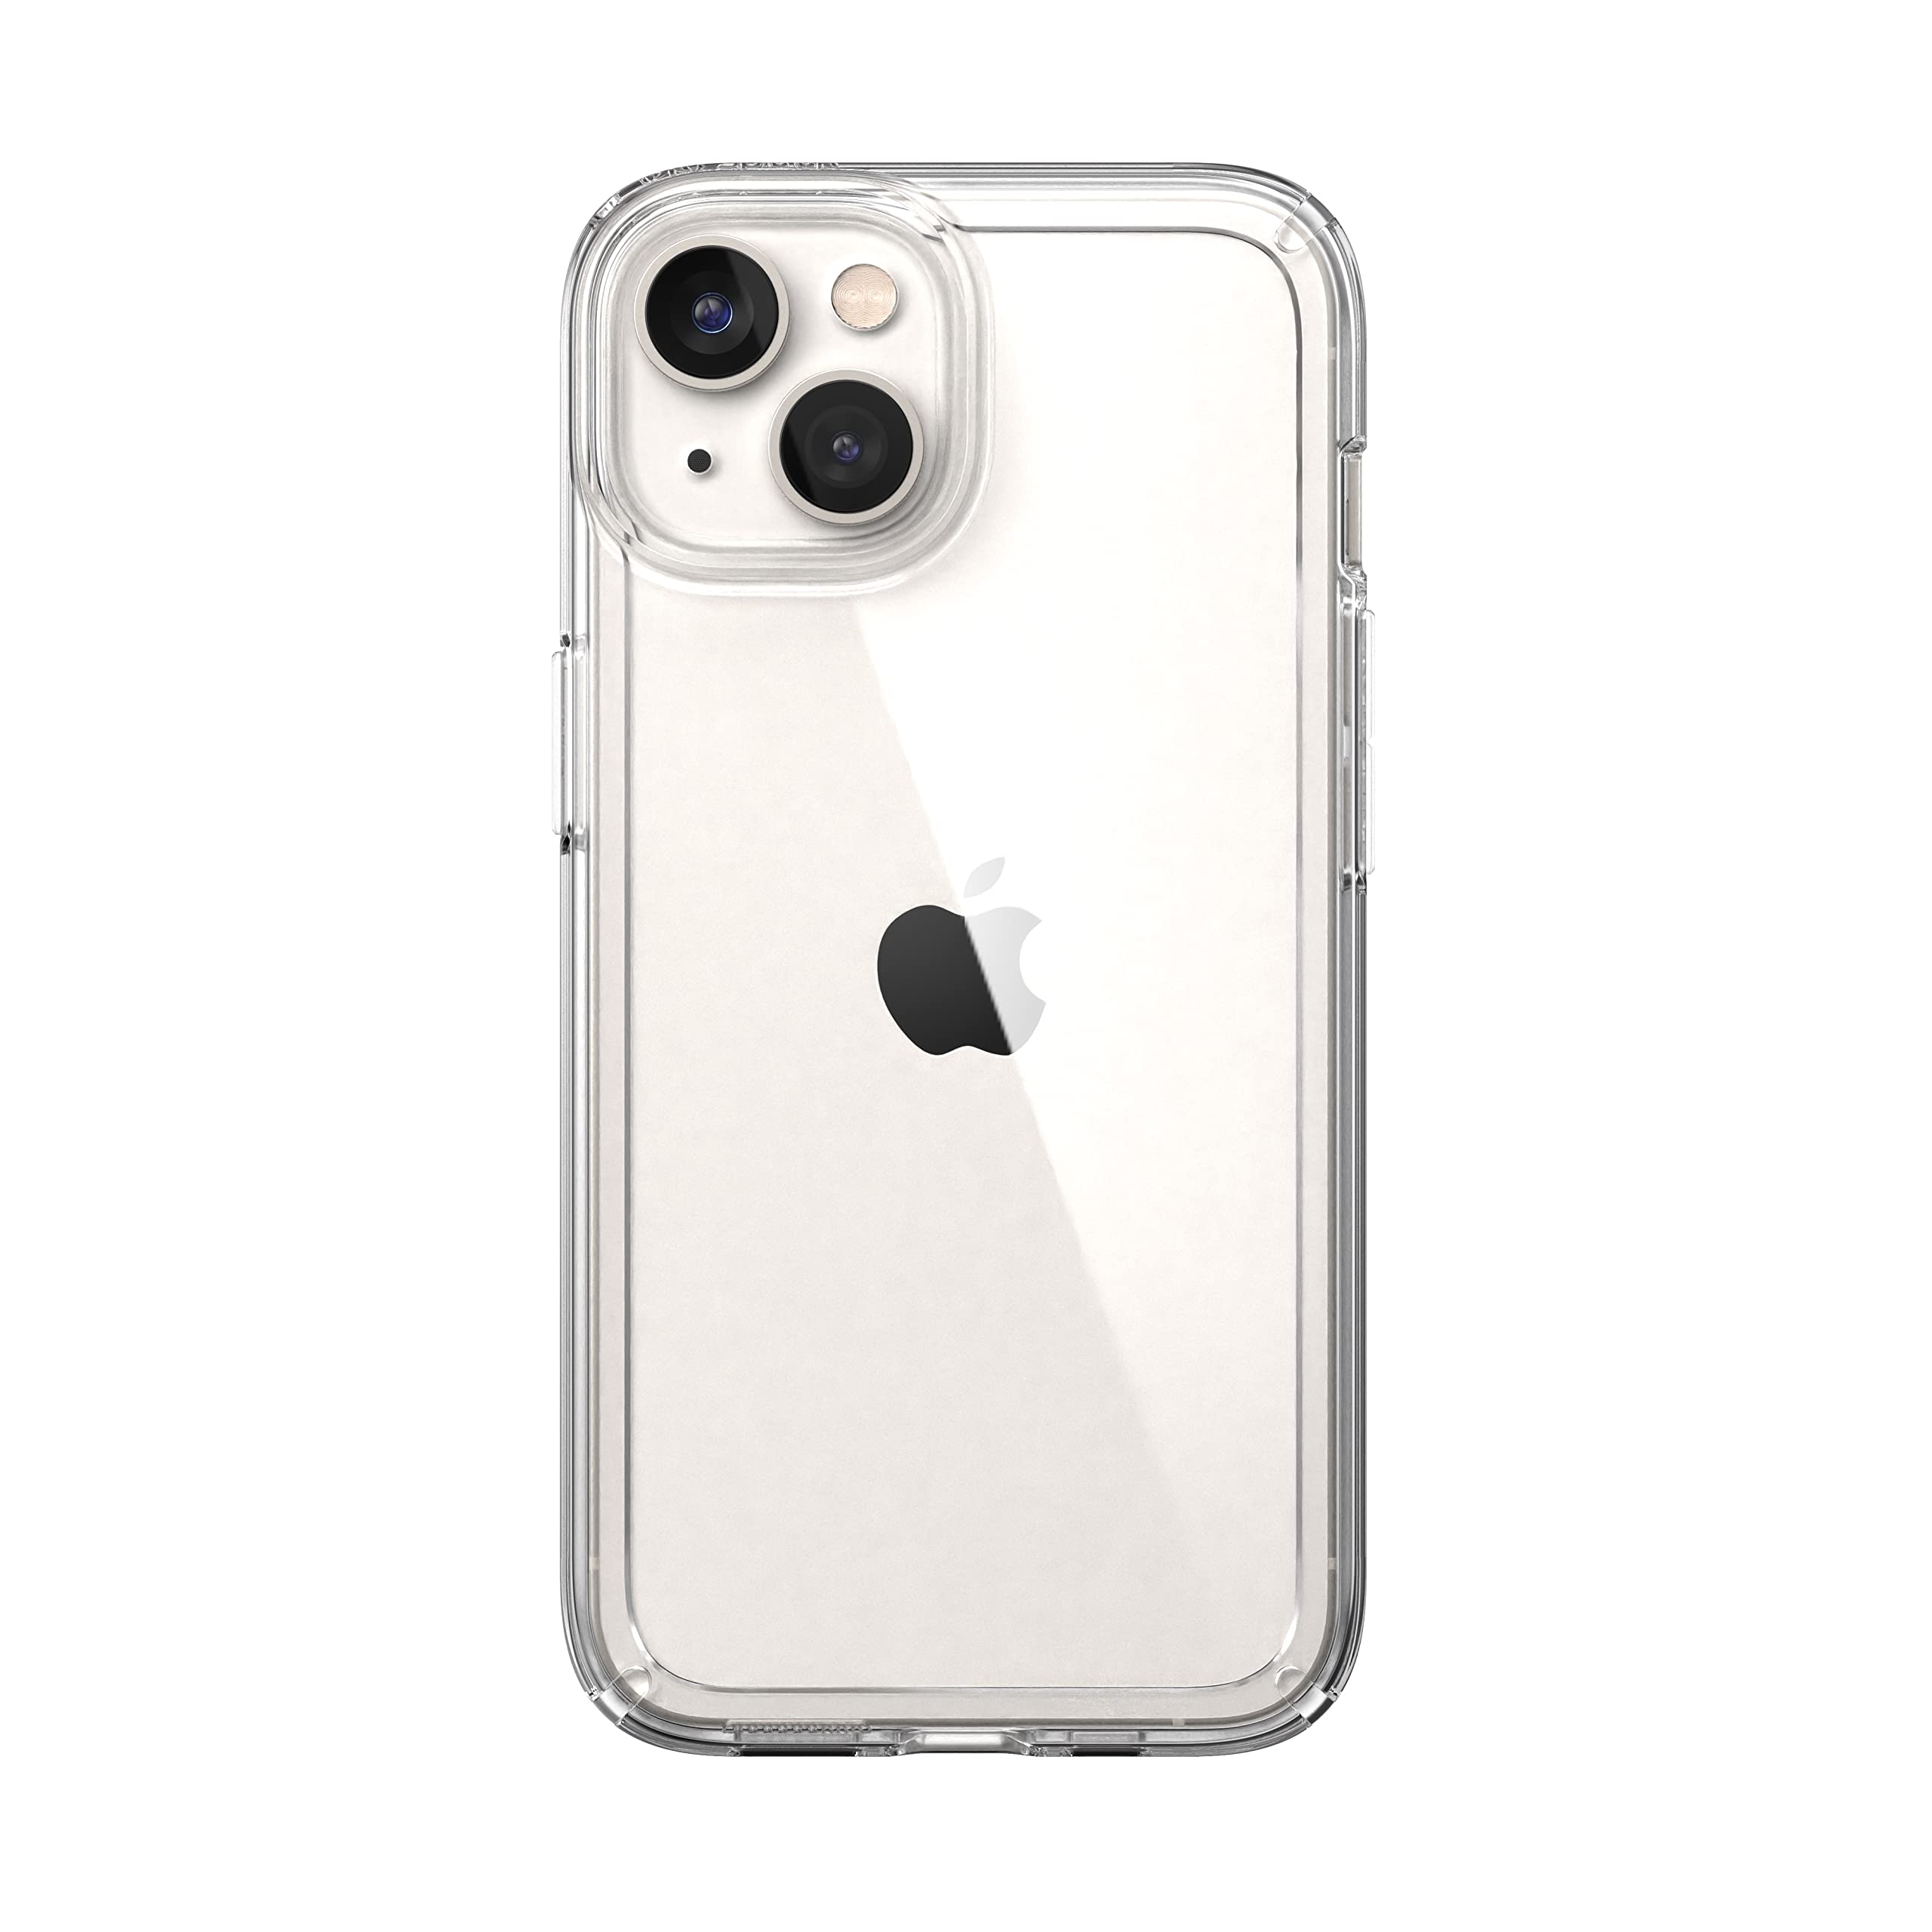 Speck Clear iPhone 14 & iPhone 13 Case - Drop Protection, Scratch Resistant & Anti-Yellowing Dual Layer Case for iPhone 14 & iPhone 13 Case for 6.1 inch Model - GemShell